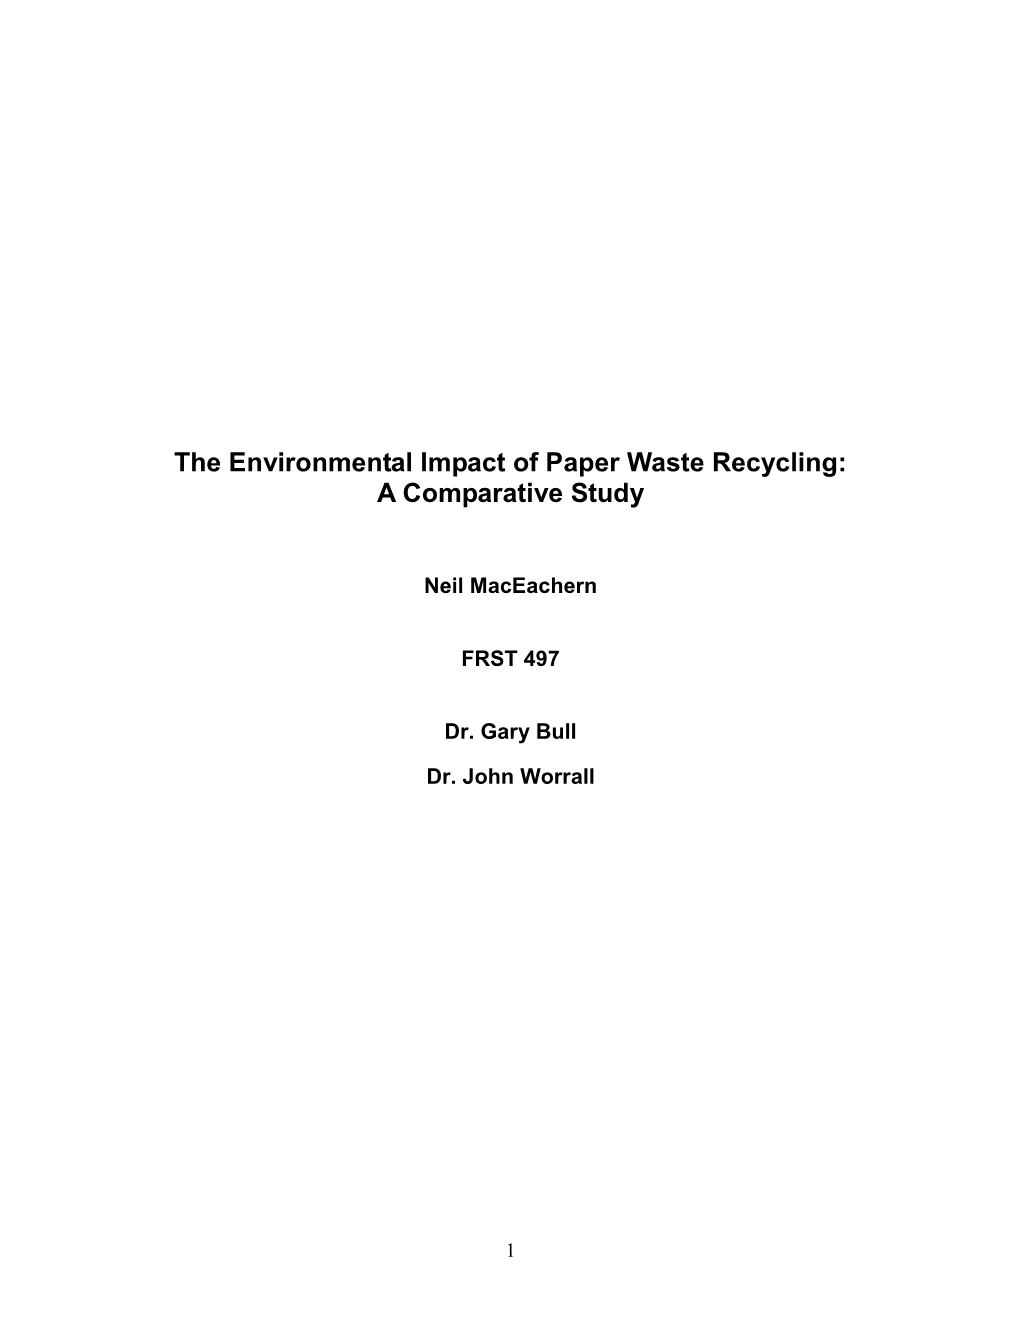 The Environmental Impact of Paper Waste Recycling: a Comparative Study